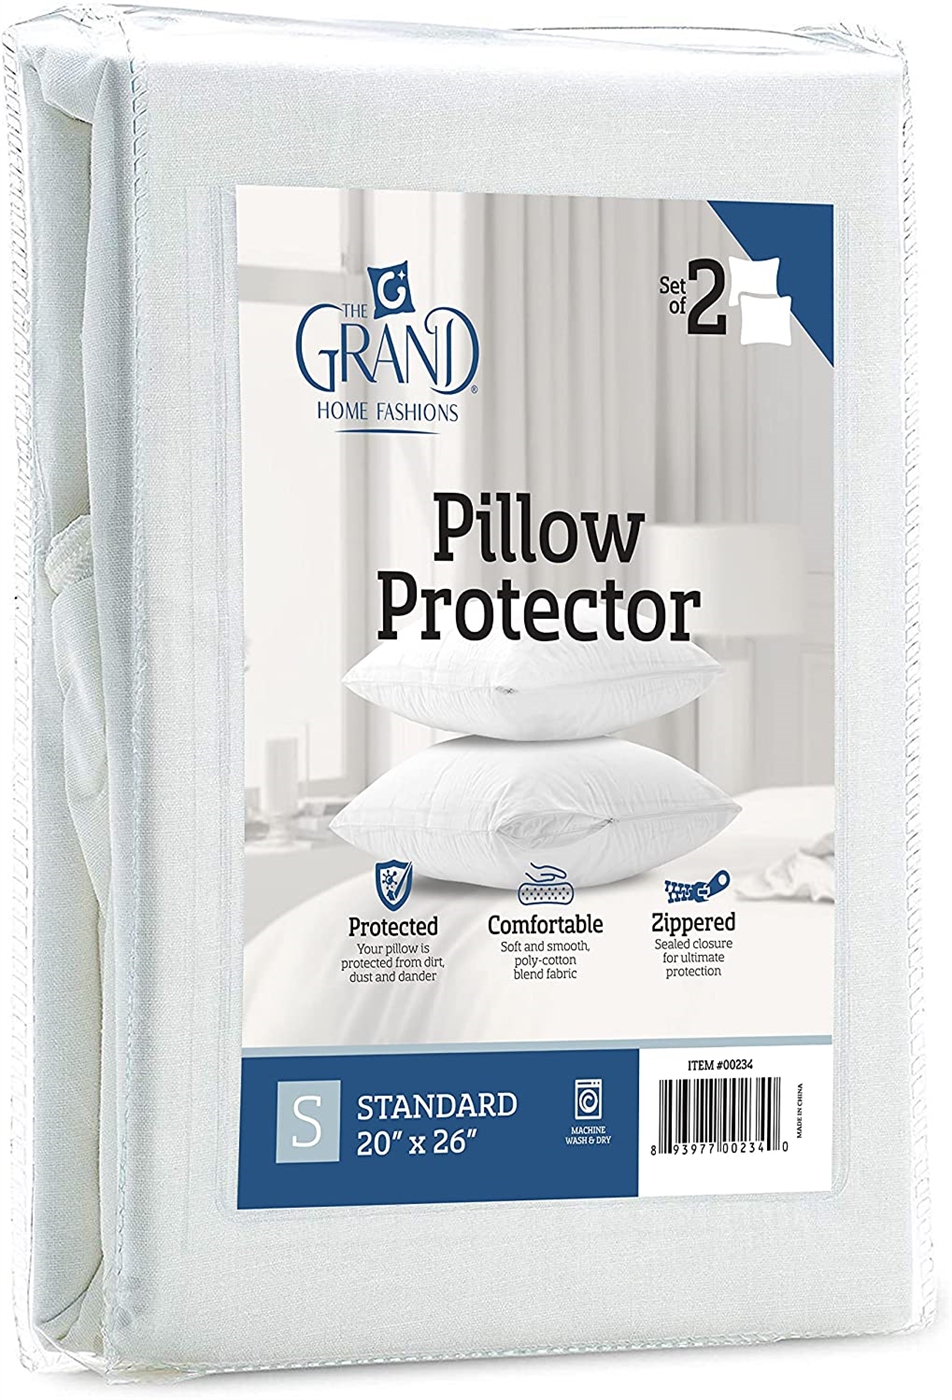 Pillow Protector Twin Pack - Discount Luxury Bedding